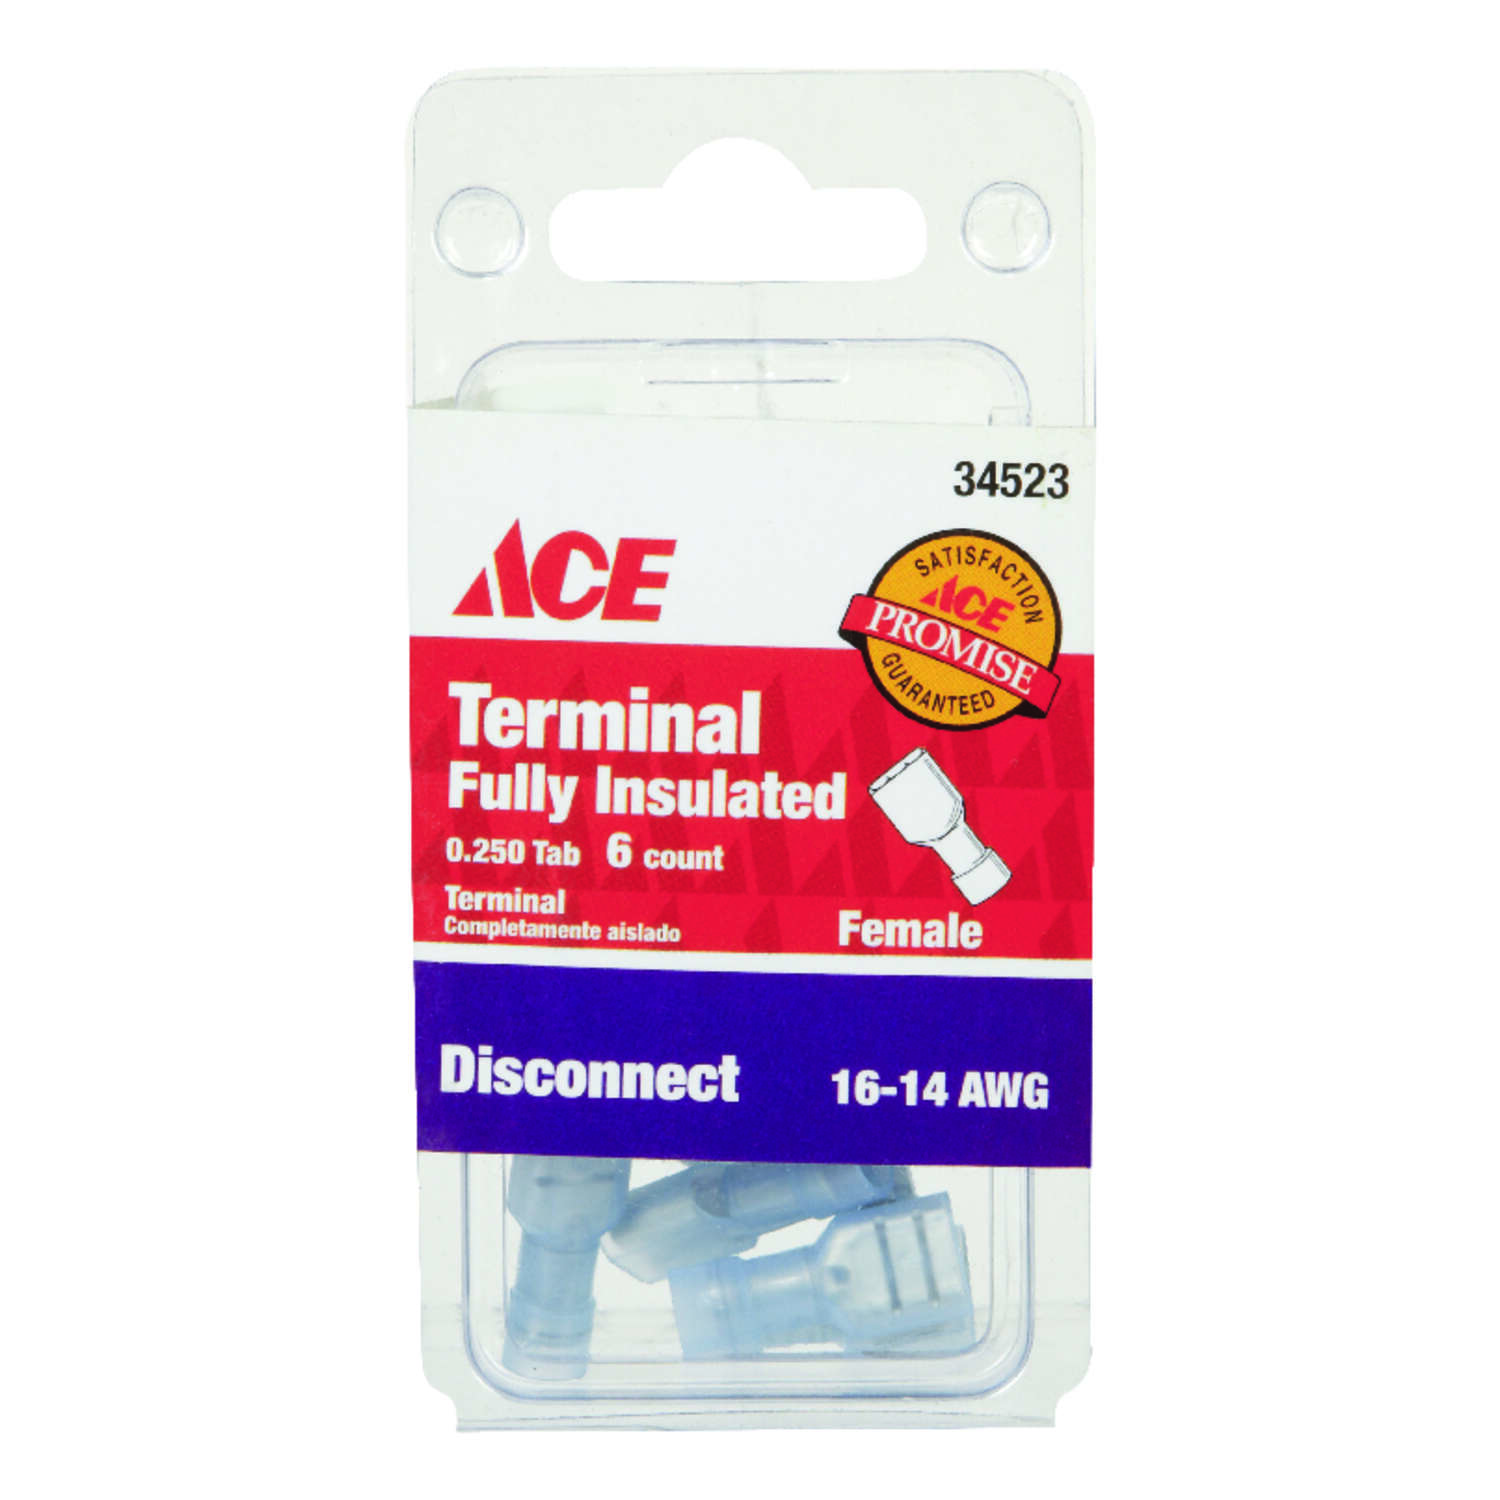 NEW ACE 34523 Blue Fully Insulated Female Disconnect Terminals 16-14 AWG 6 